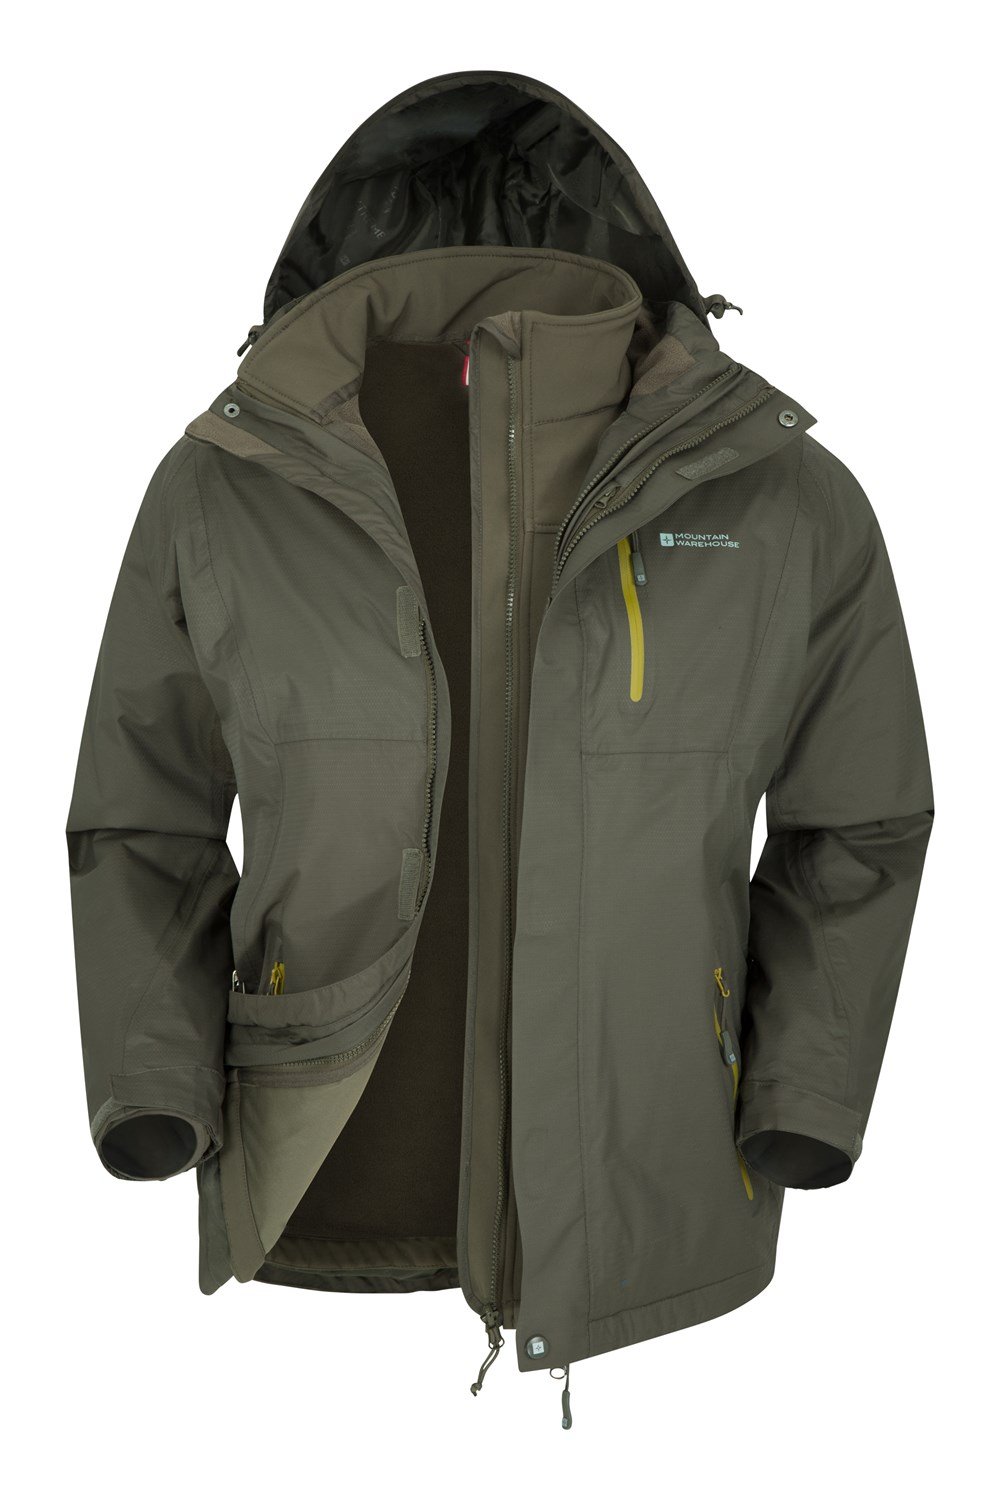 Mountain Warehouse Mens Bracken 3in1 Waterproof Outer and Detatchable Softshell | eBay